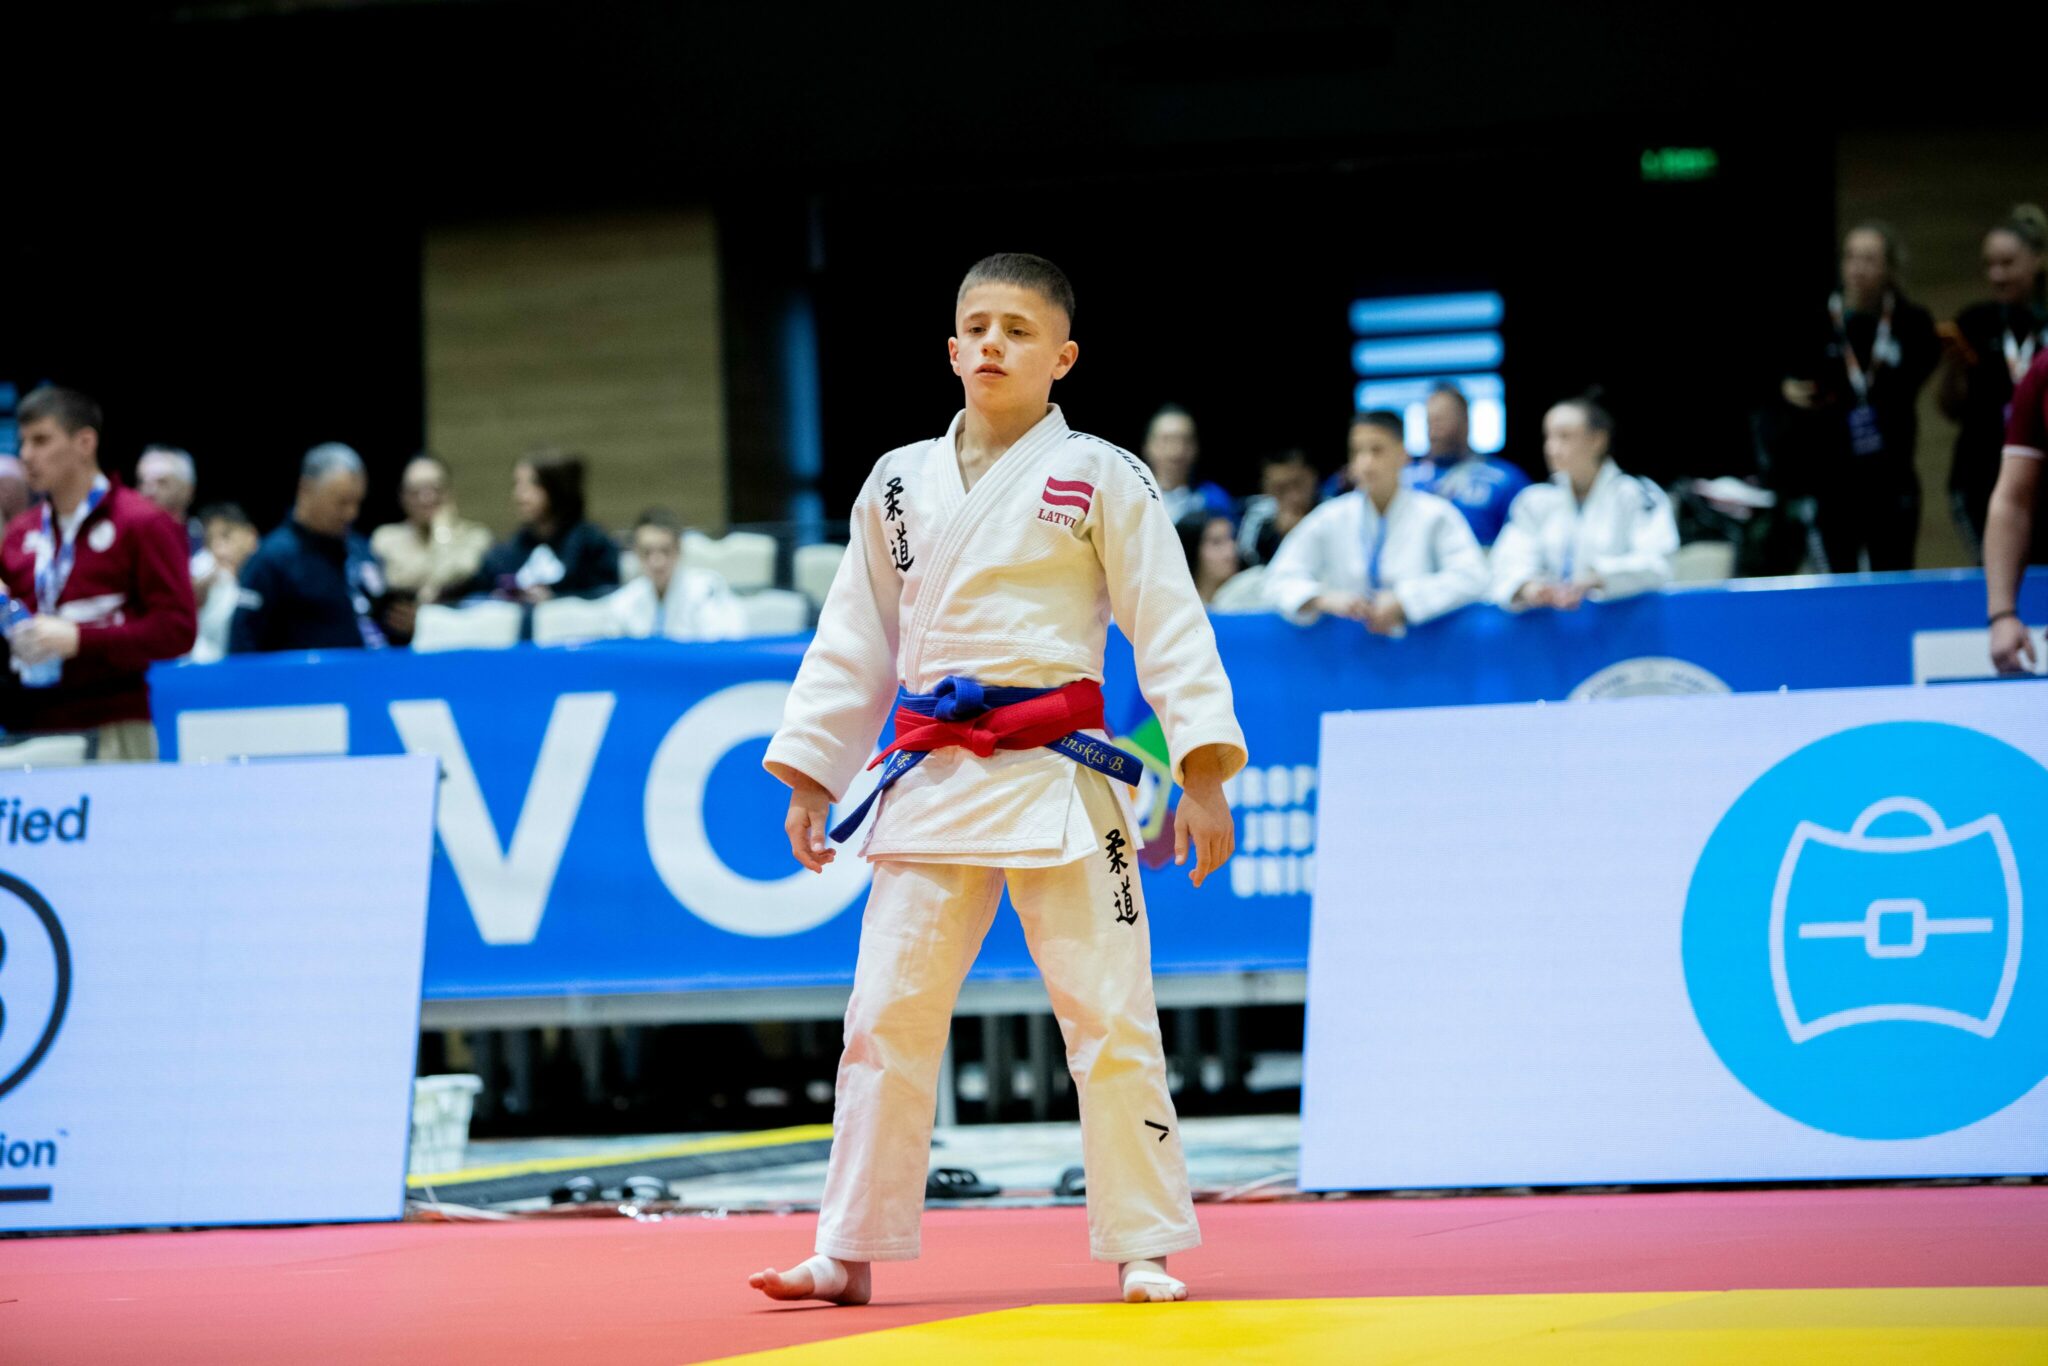 NEXT EUROPEAN JUDO HOPES CUP FAST APPROACHING